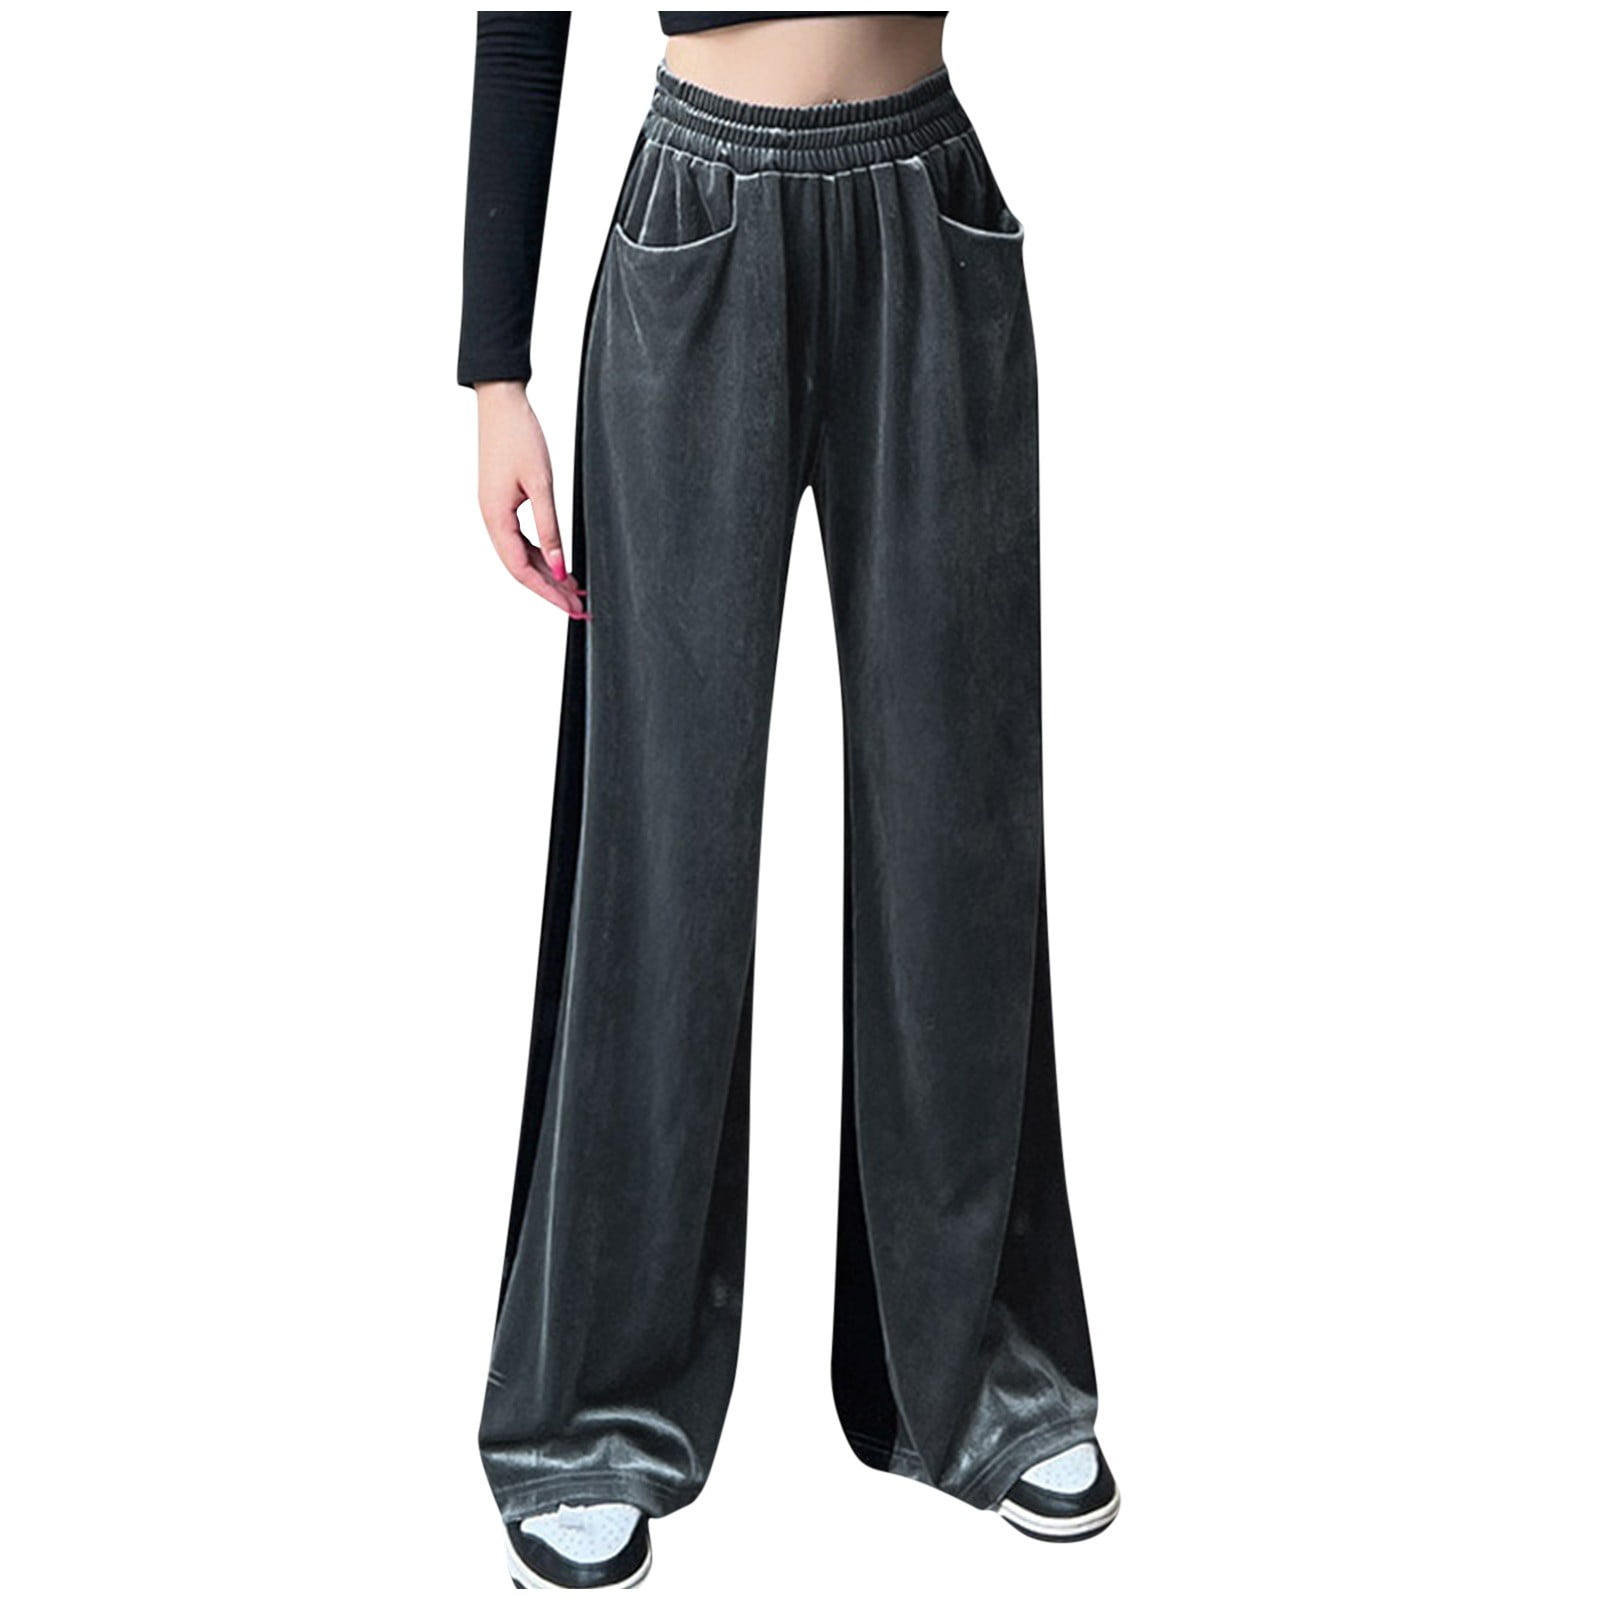 RQYYD High Waisted Velvet Pants for Women Elastic Waist Wide Leg Pants  Loose Palazzo Pants Velour Sweatpants with Pockets Gray M